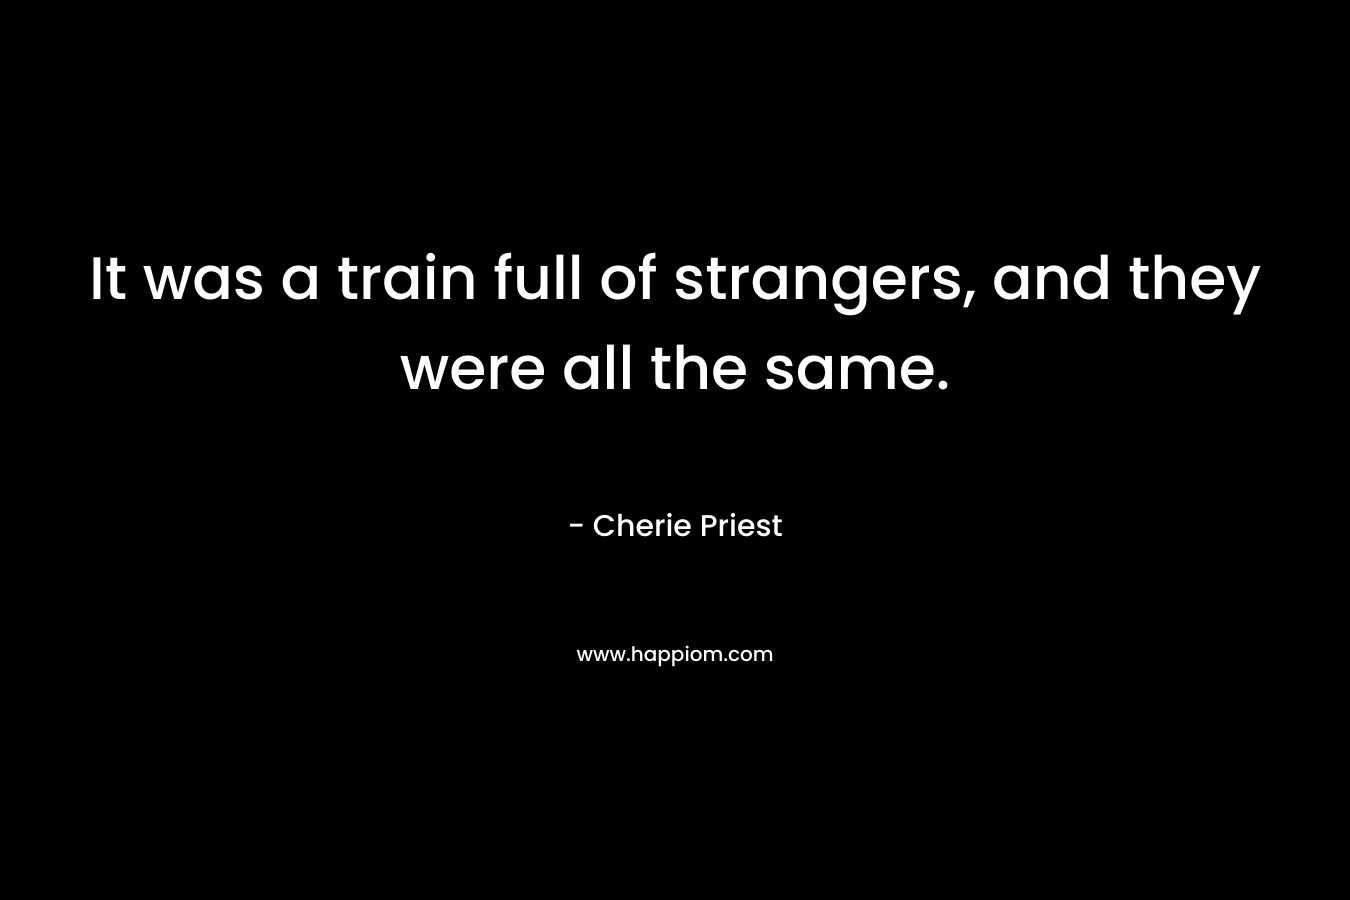 It was a train full of strangers, and they were all the same. – Cherie Priest